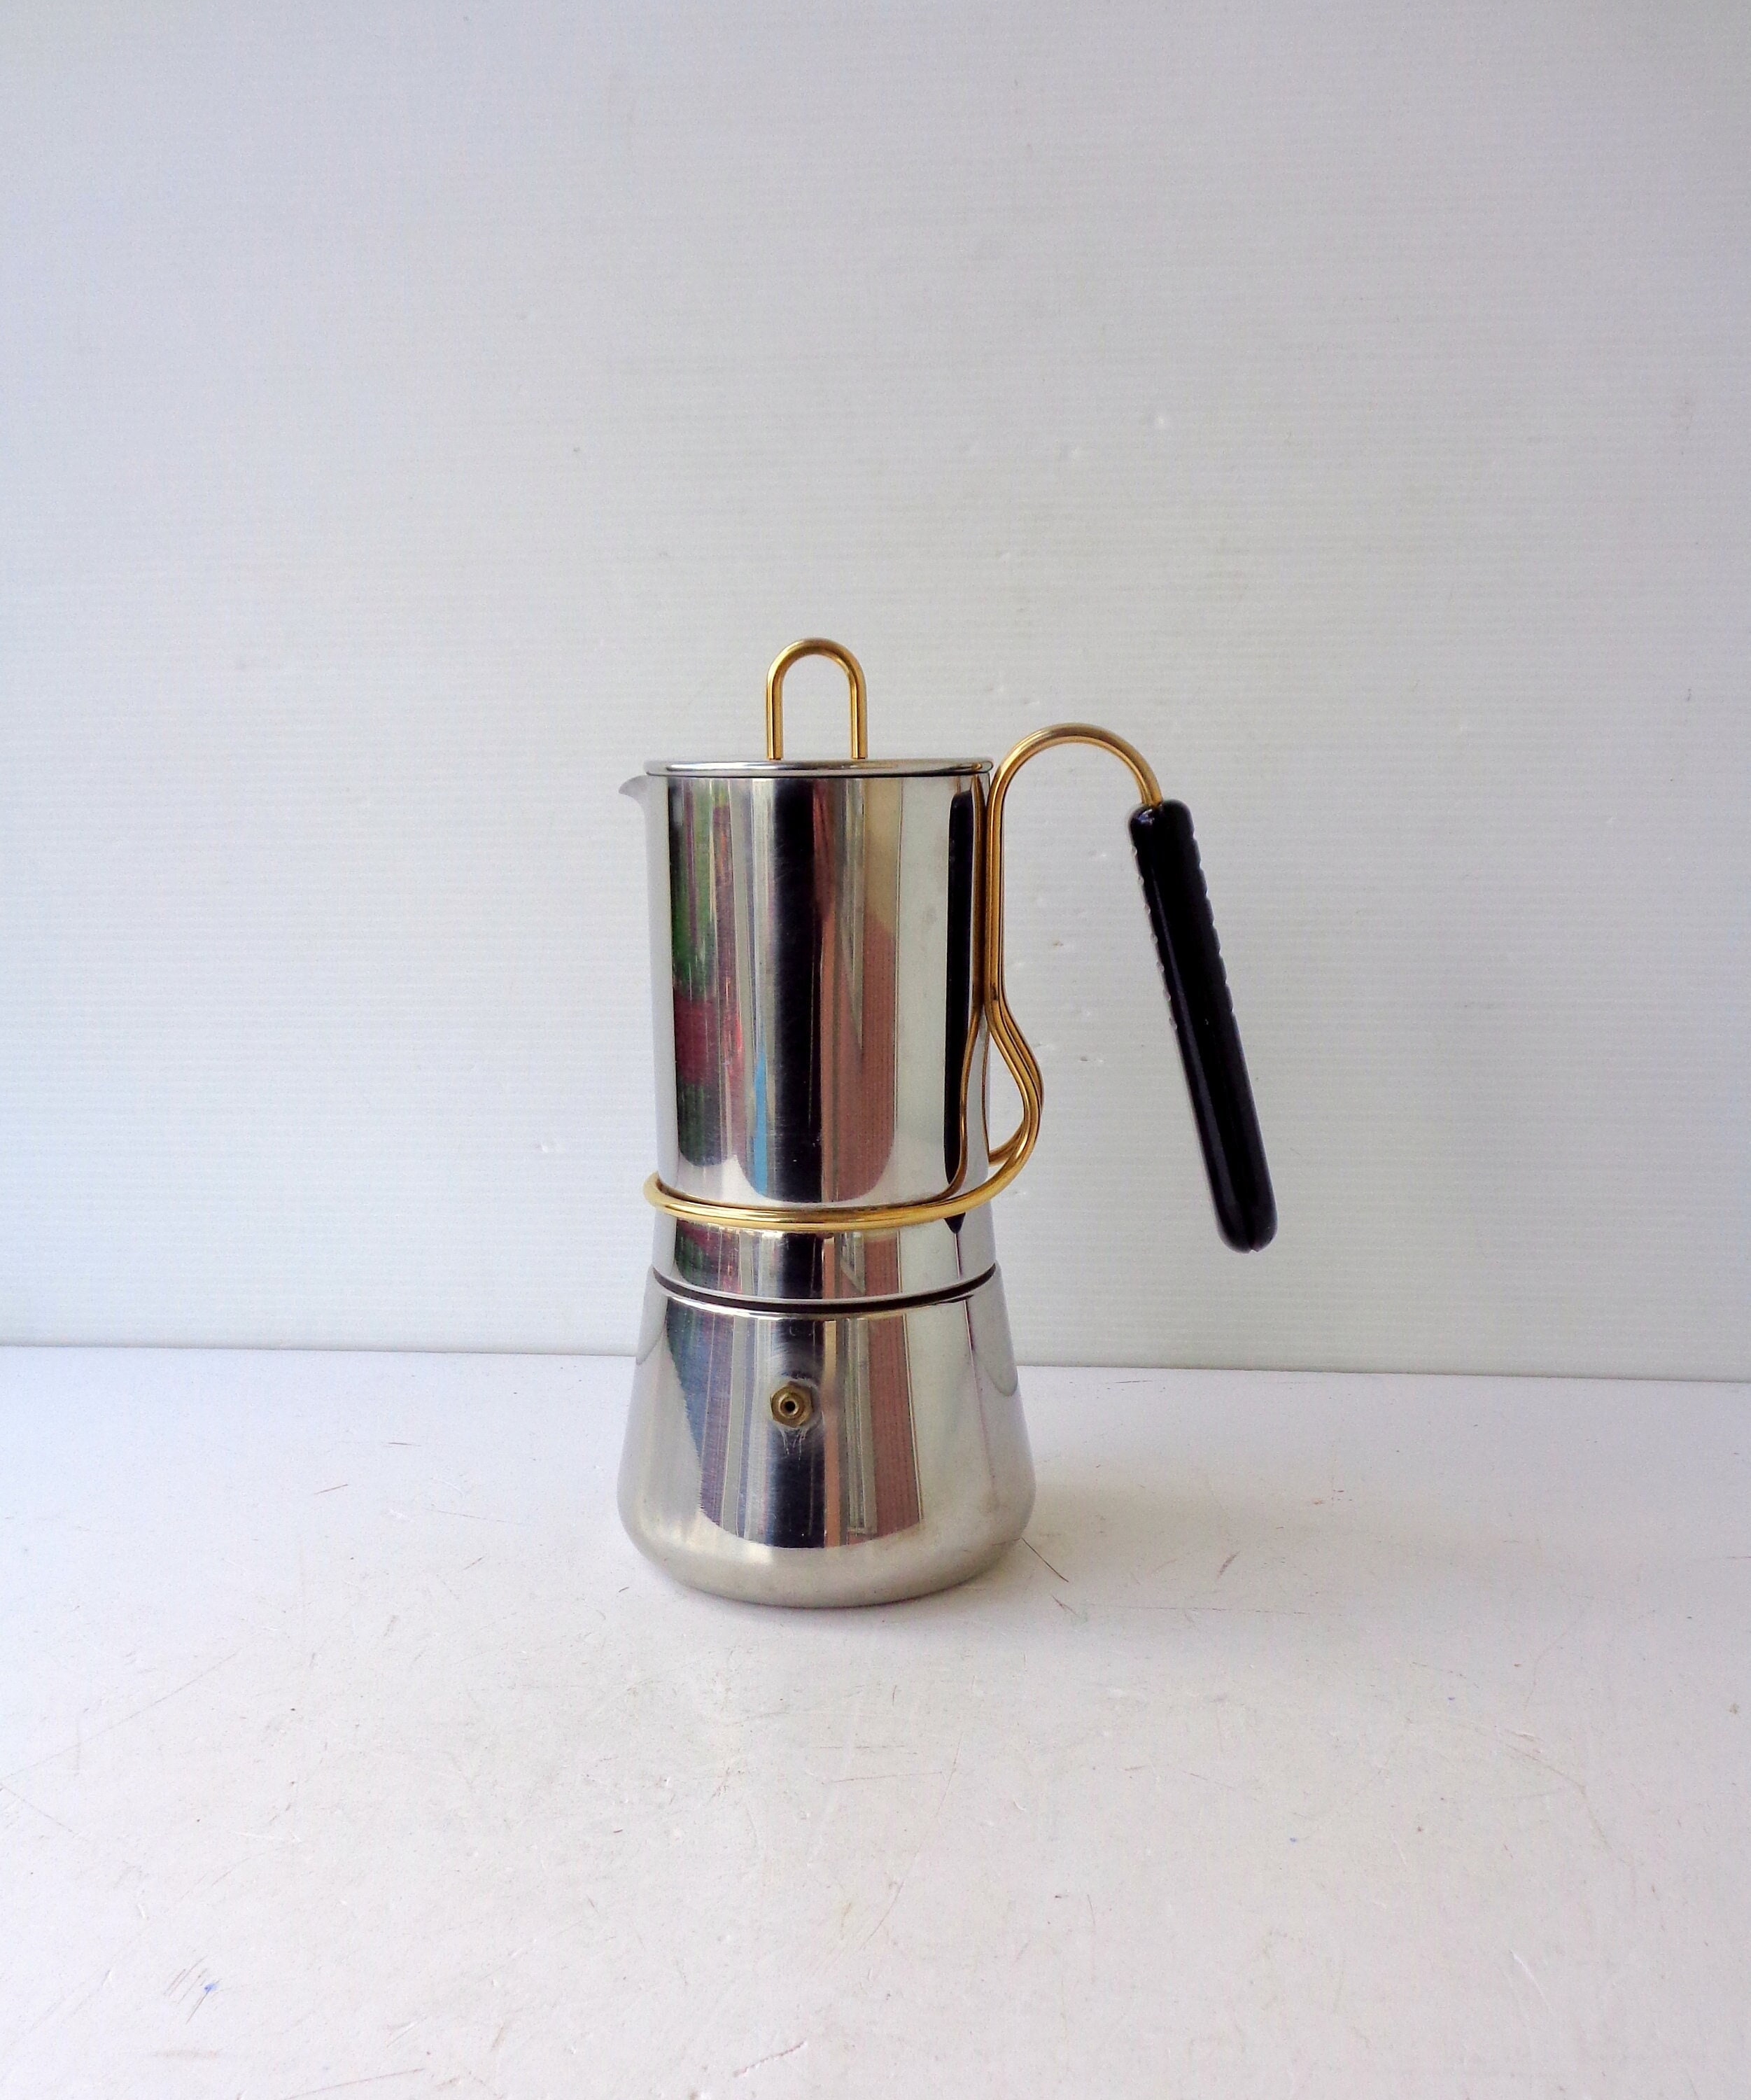 Vintage Bialetti Espresso Stove Top Aluminum Moka Pot Made in Italy Kitchen  & Dining Decor Coffee Pot Espresso Makers Collectable 